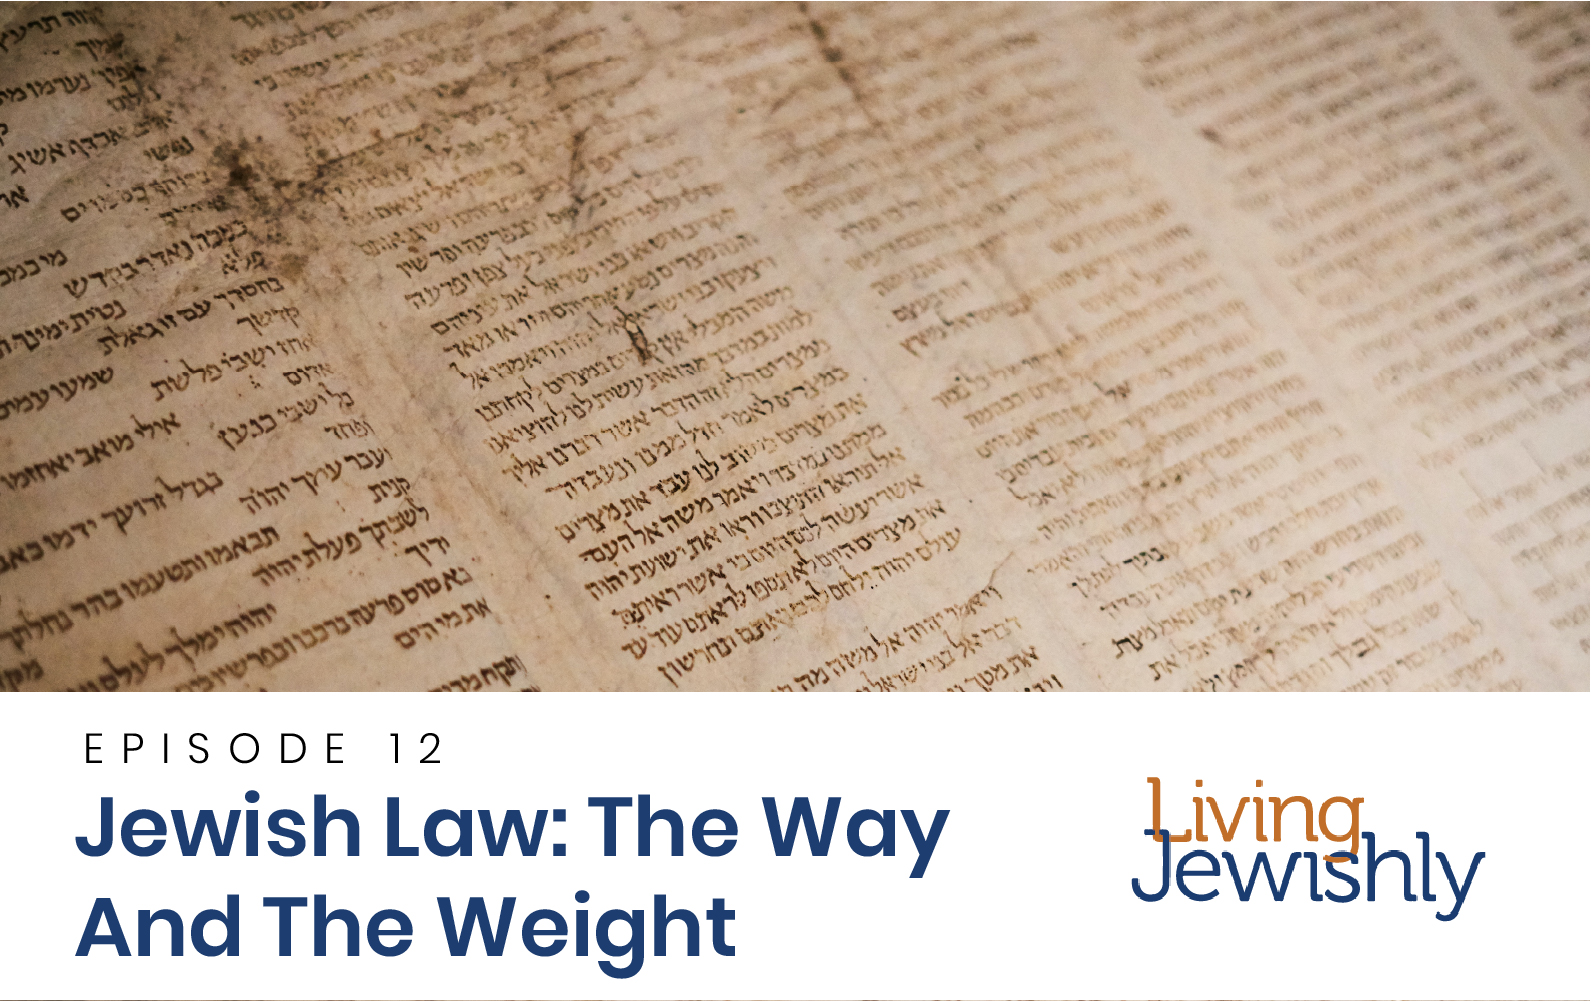 Episode 12: Jewish Law – The Way And The Weight